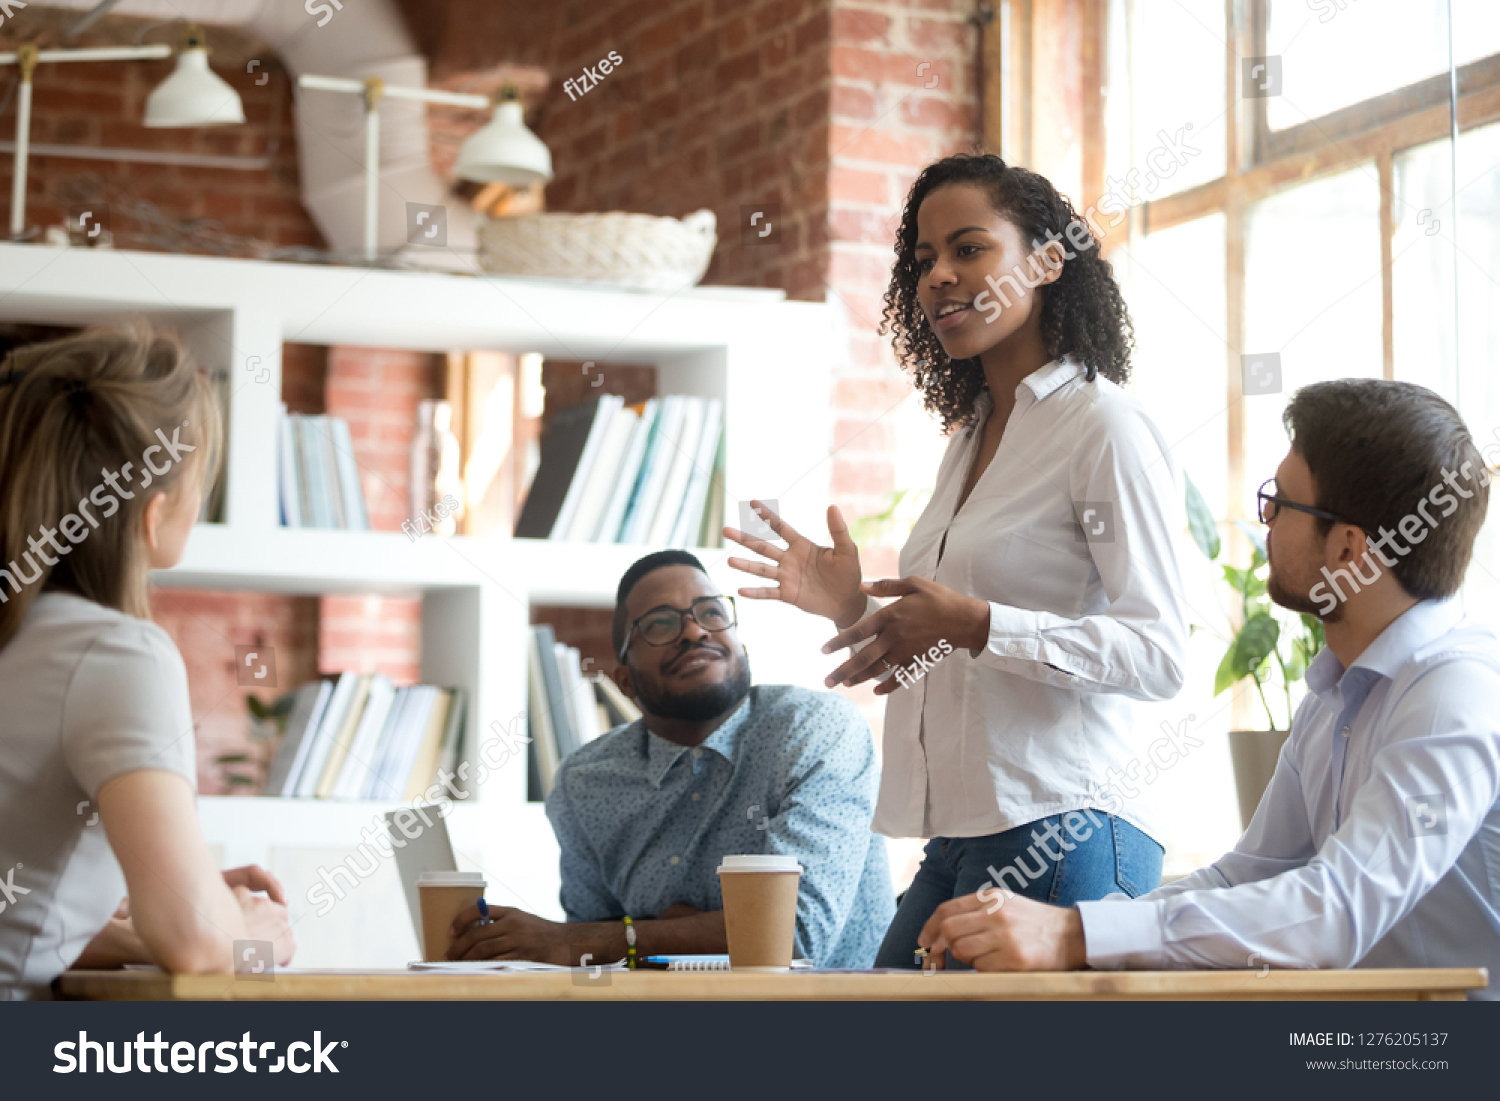 Ambitious smart african black female employee speaking at diverse meeting share creative idea opinion at group briefing while jealous envious skeptical male coworkers looking listening to colleague #1276205137